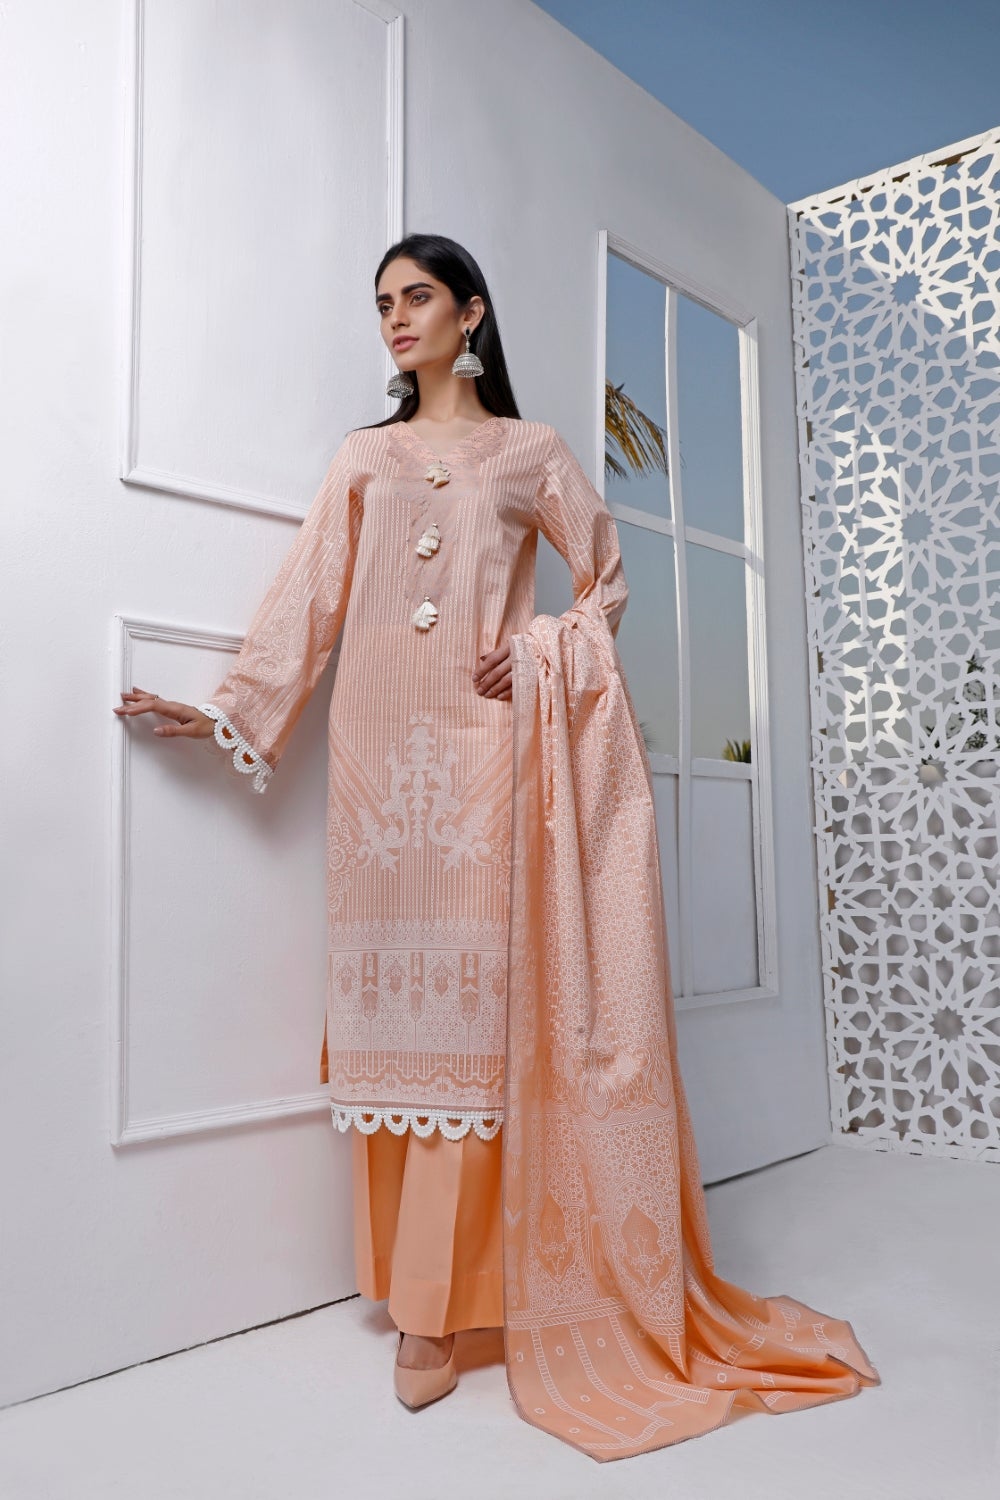 Ittehad Crystal Printed Lawn Unstitched 3 Piece Suit - LF-CL-21109A-Summer Collection